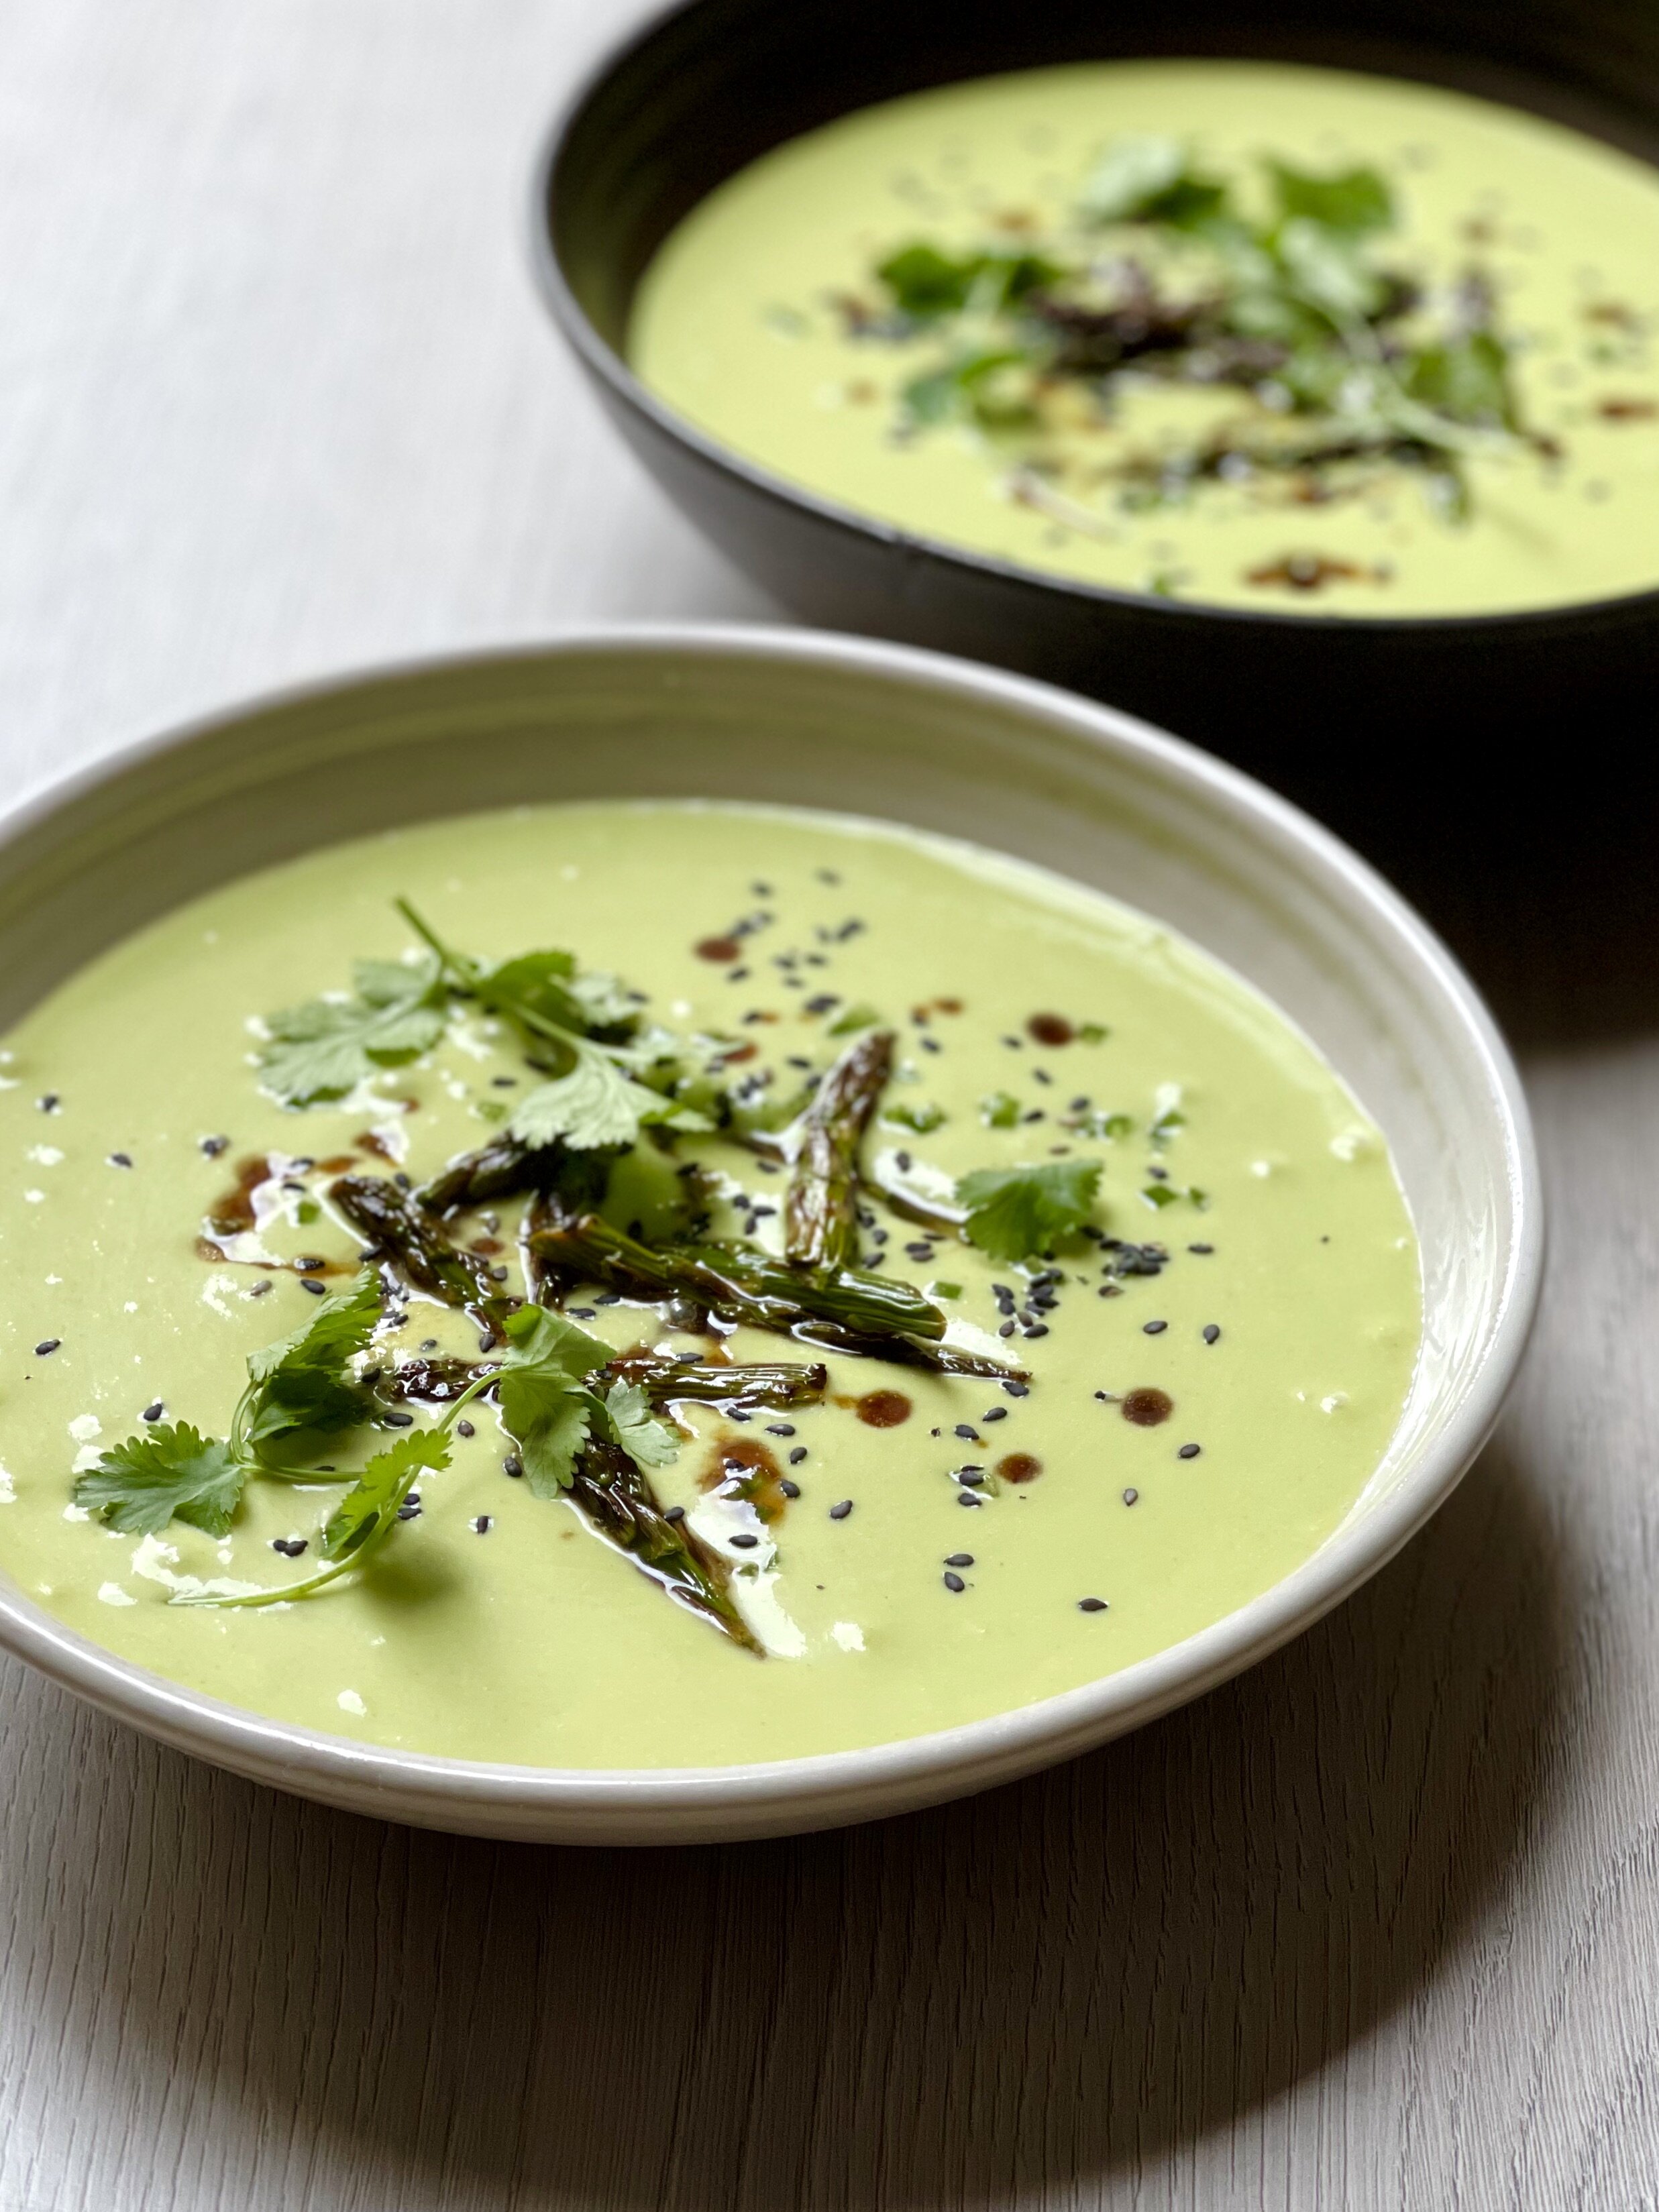 Chilled Thai asparagus soup by Joey and Katy